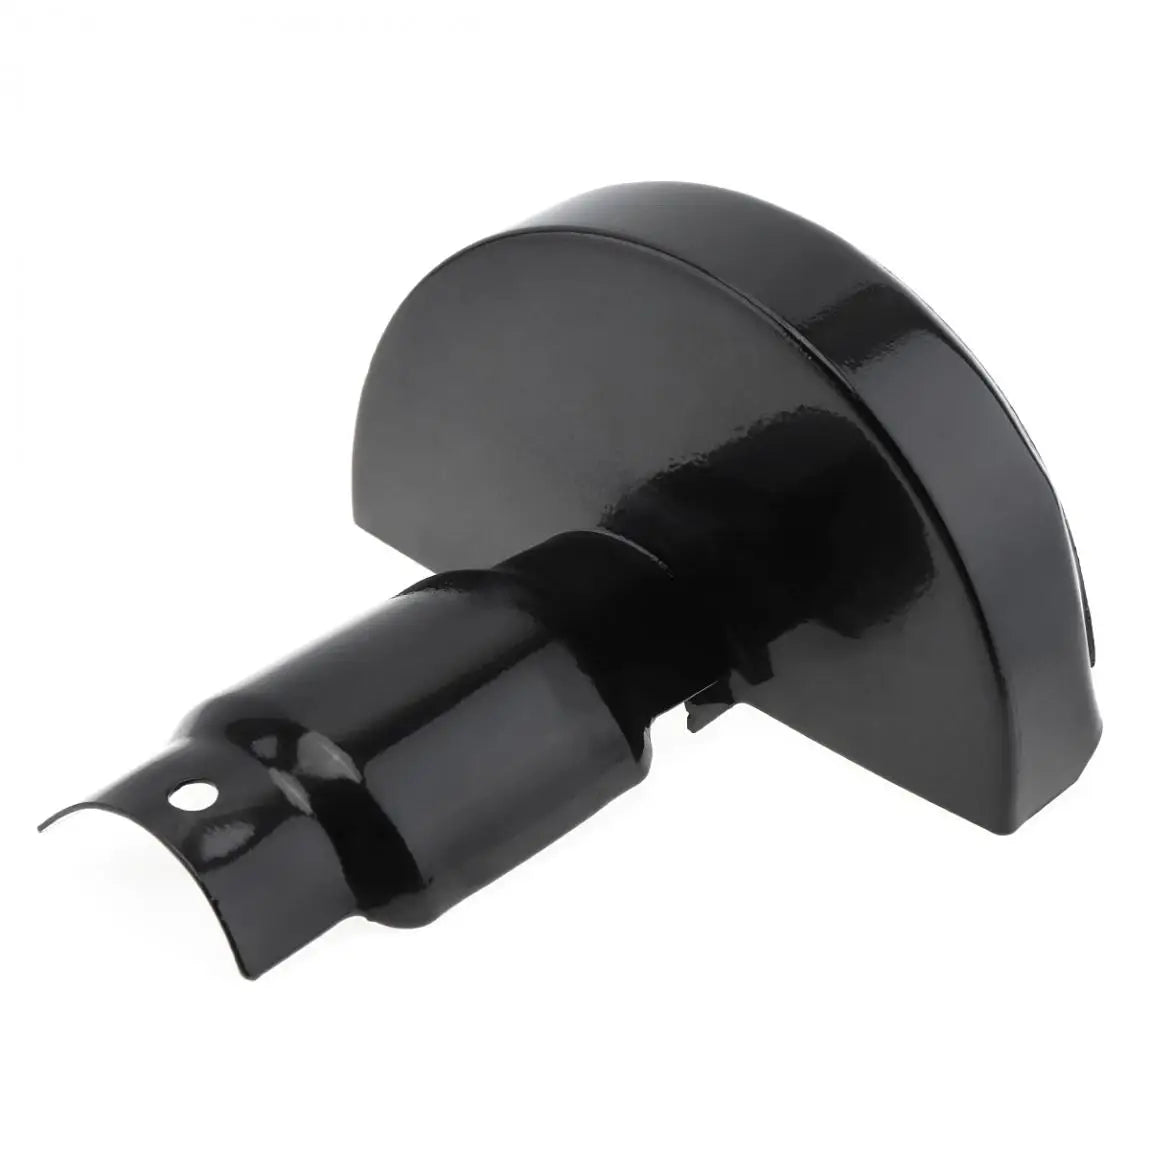 Black Cutting Holder Machine Metal Wheel Guard Safety Protector Cover